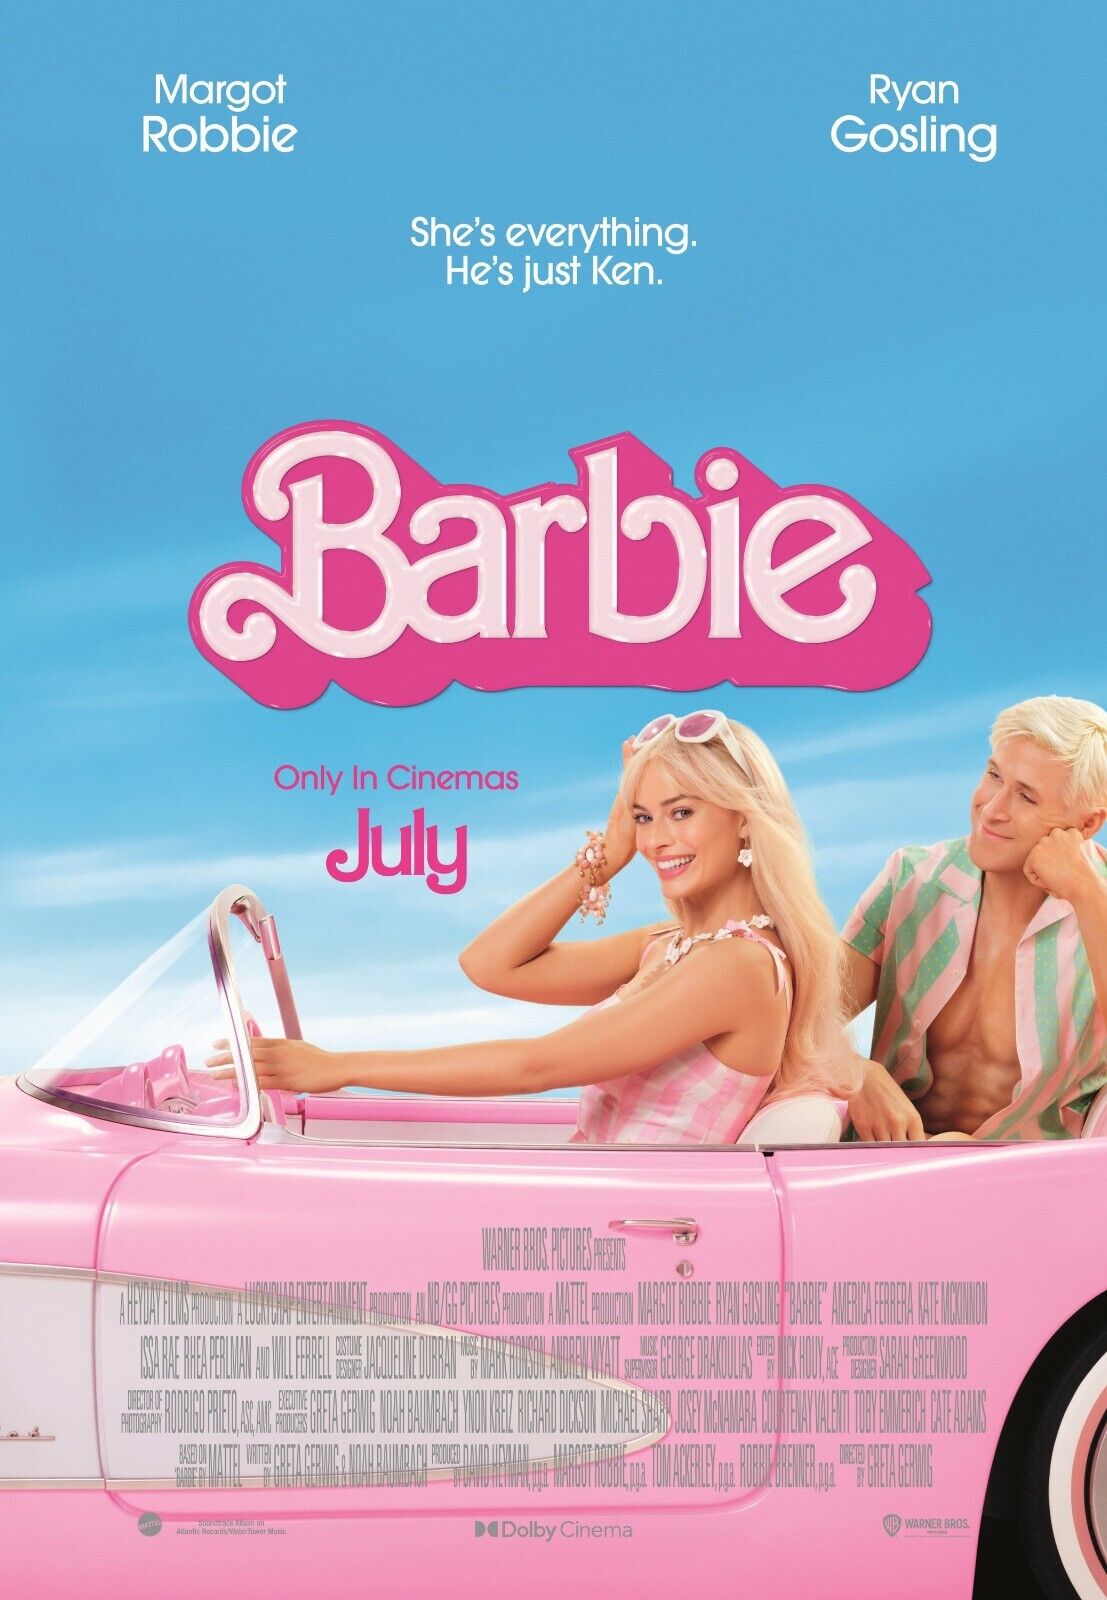 A woman sits in the front seat of a pink car while a man gazes lovingly at her. The text reads "She's everything. He's just Ken. Barbie"